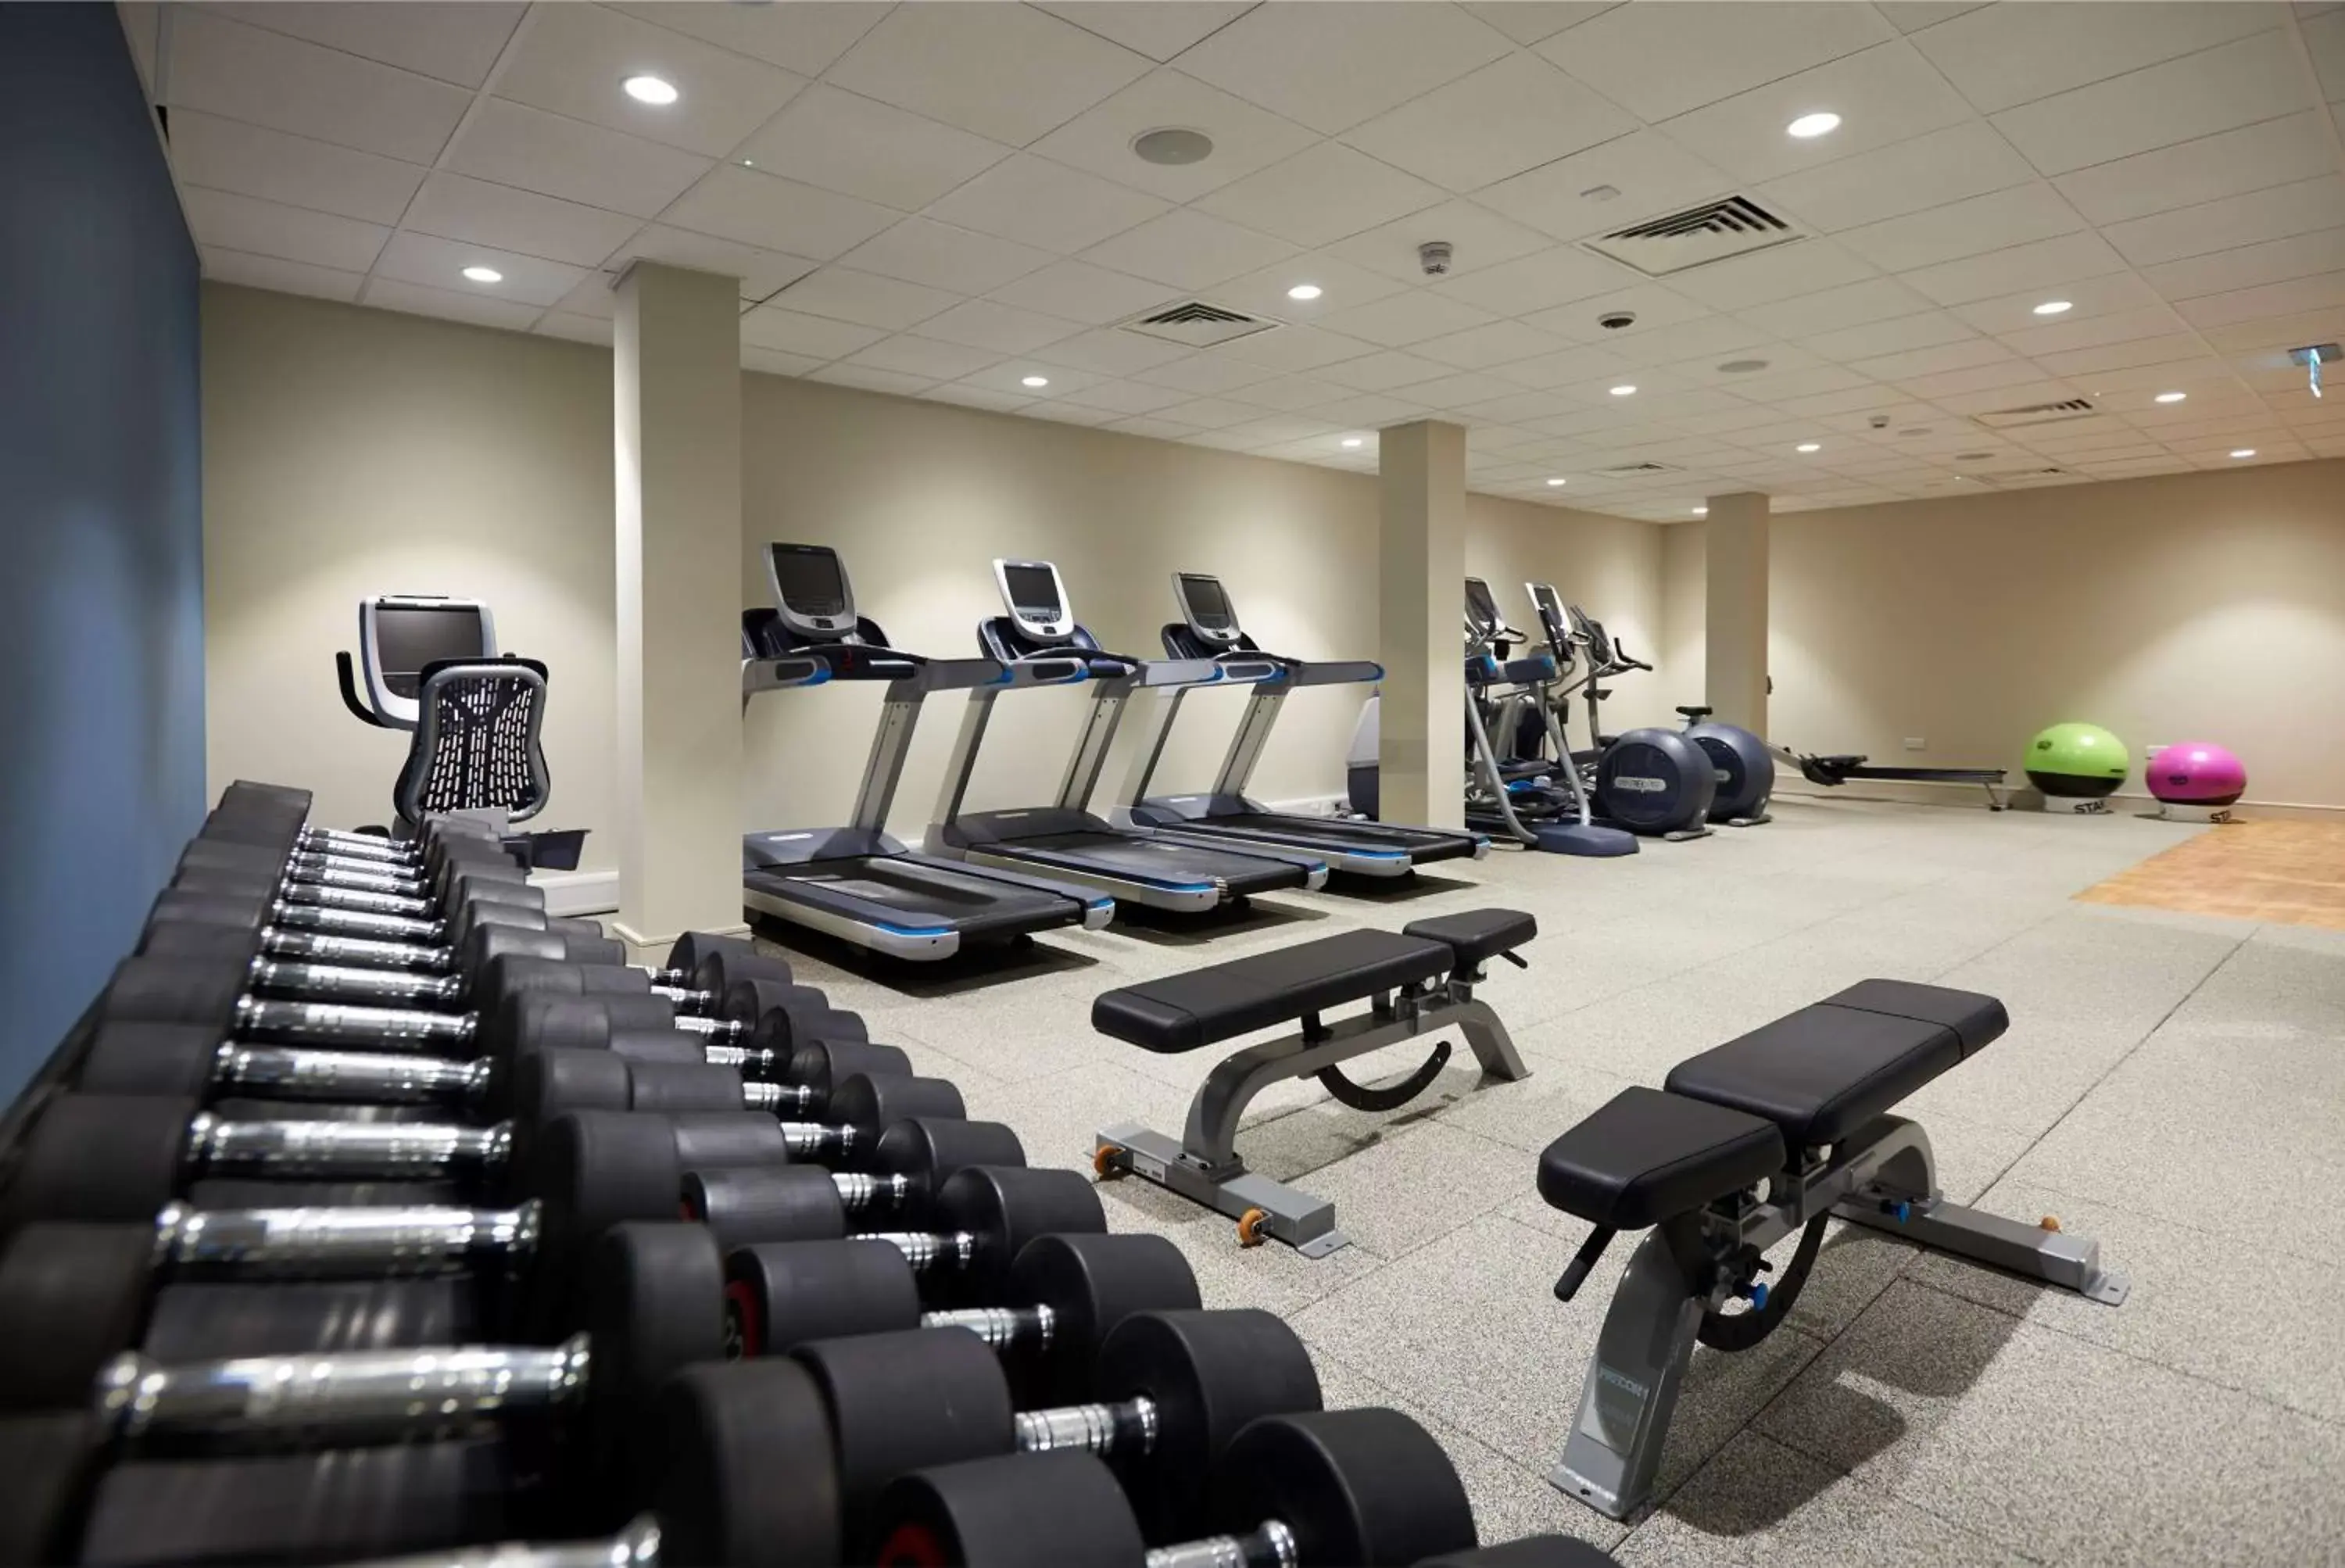 Fitness centre/facilities, Fitness Center/Facilities in Hilton at the Ageas Bowl, Southampton